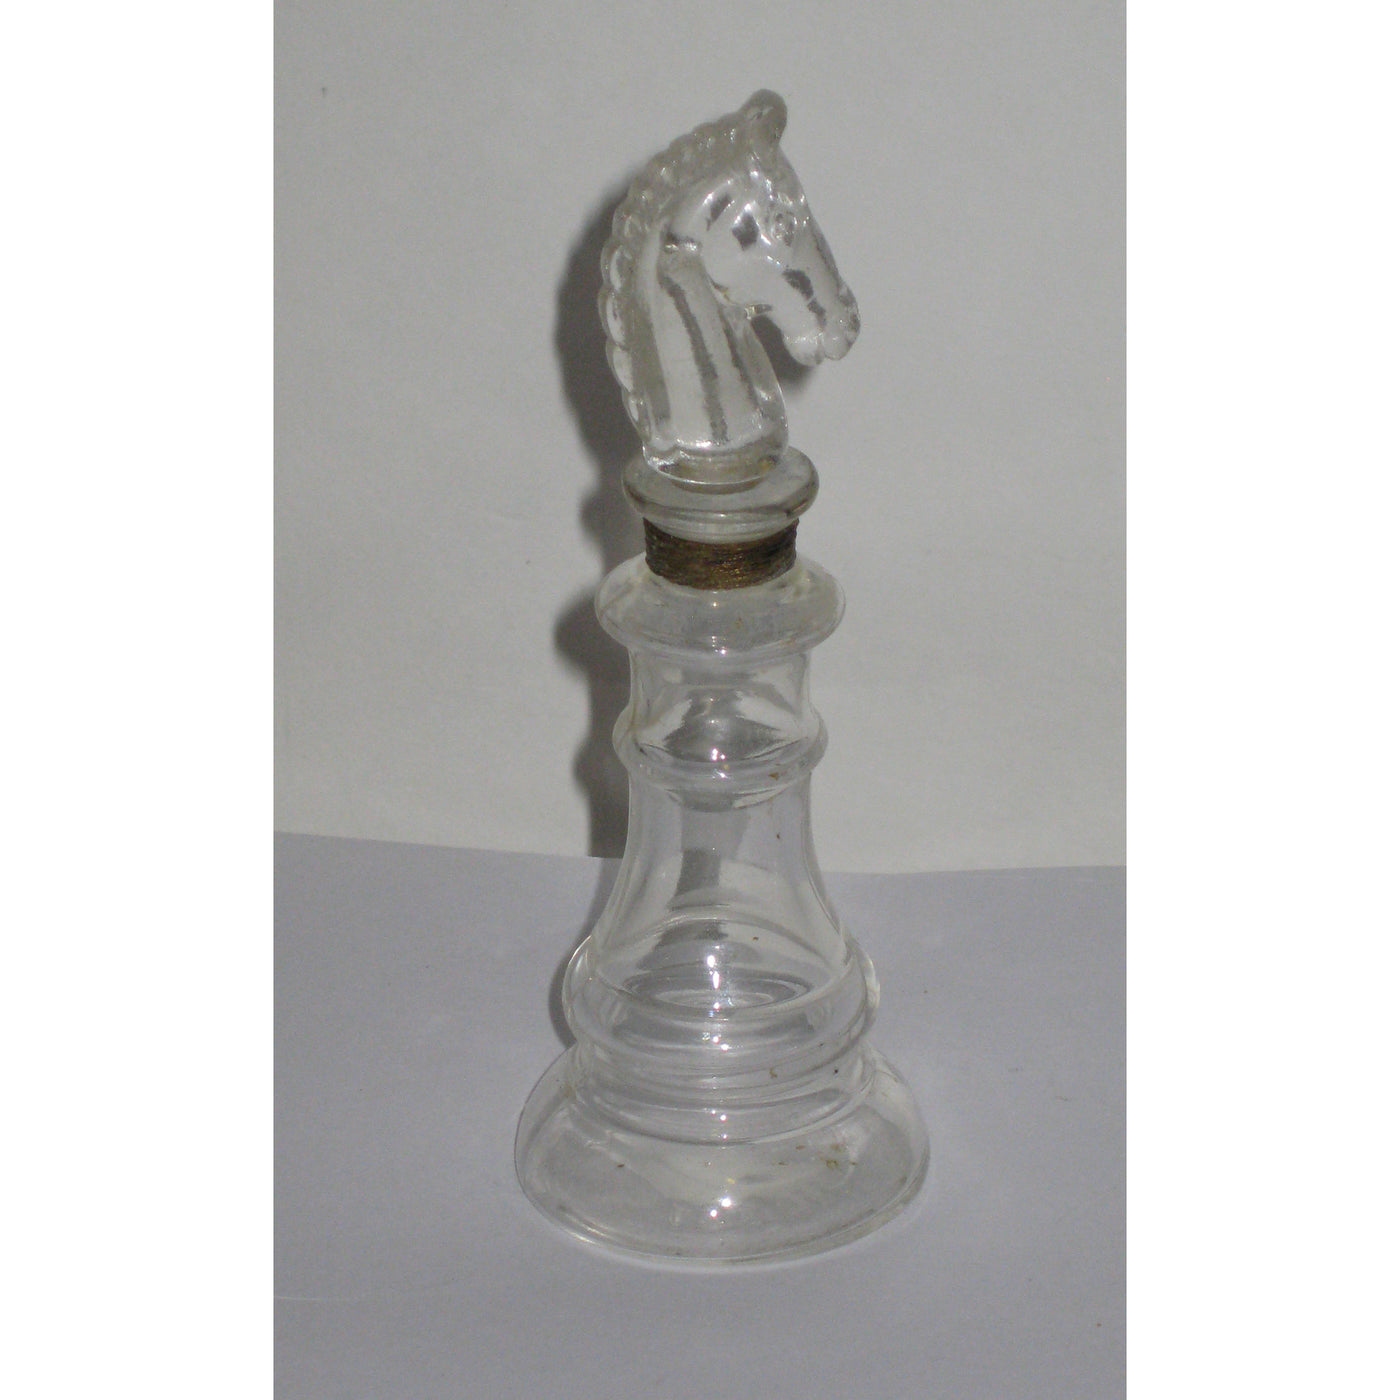 Vintage Mary Chess Knight Perfume Bottle